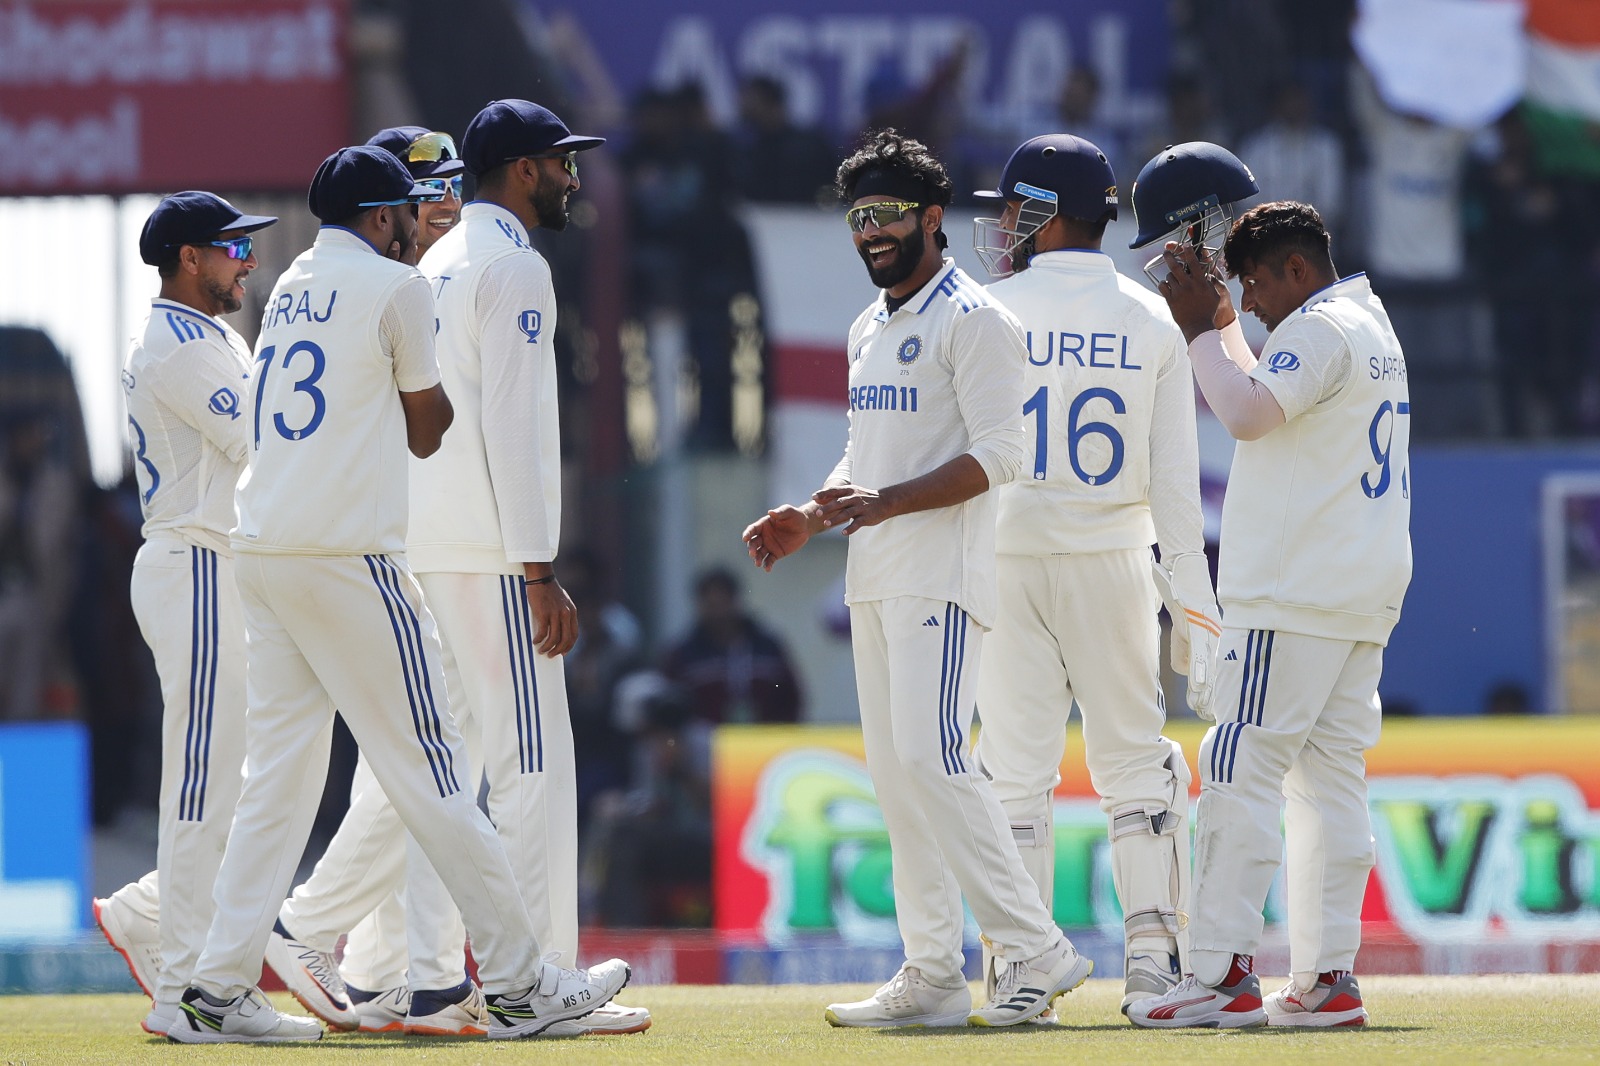 India hammers England by innings and 64 runs, claims series 4-1